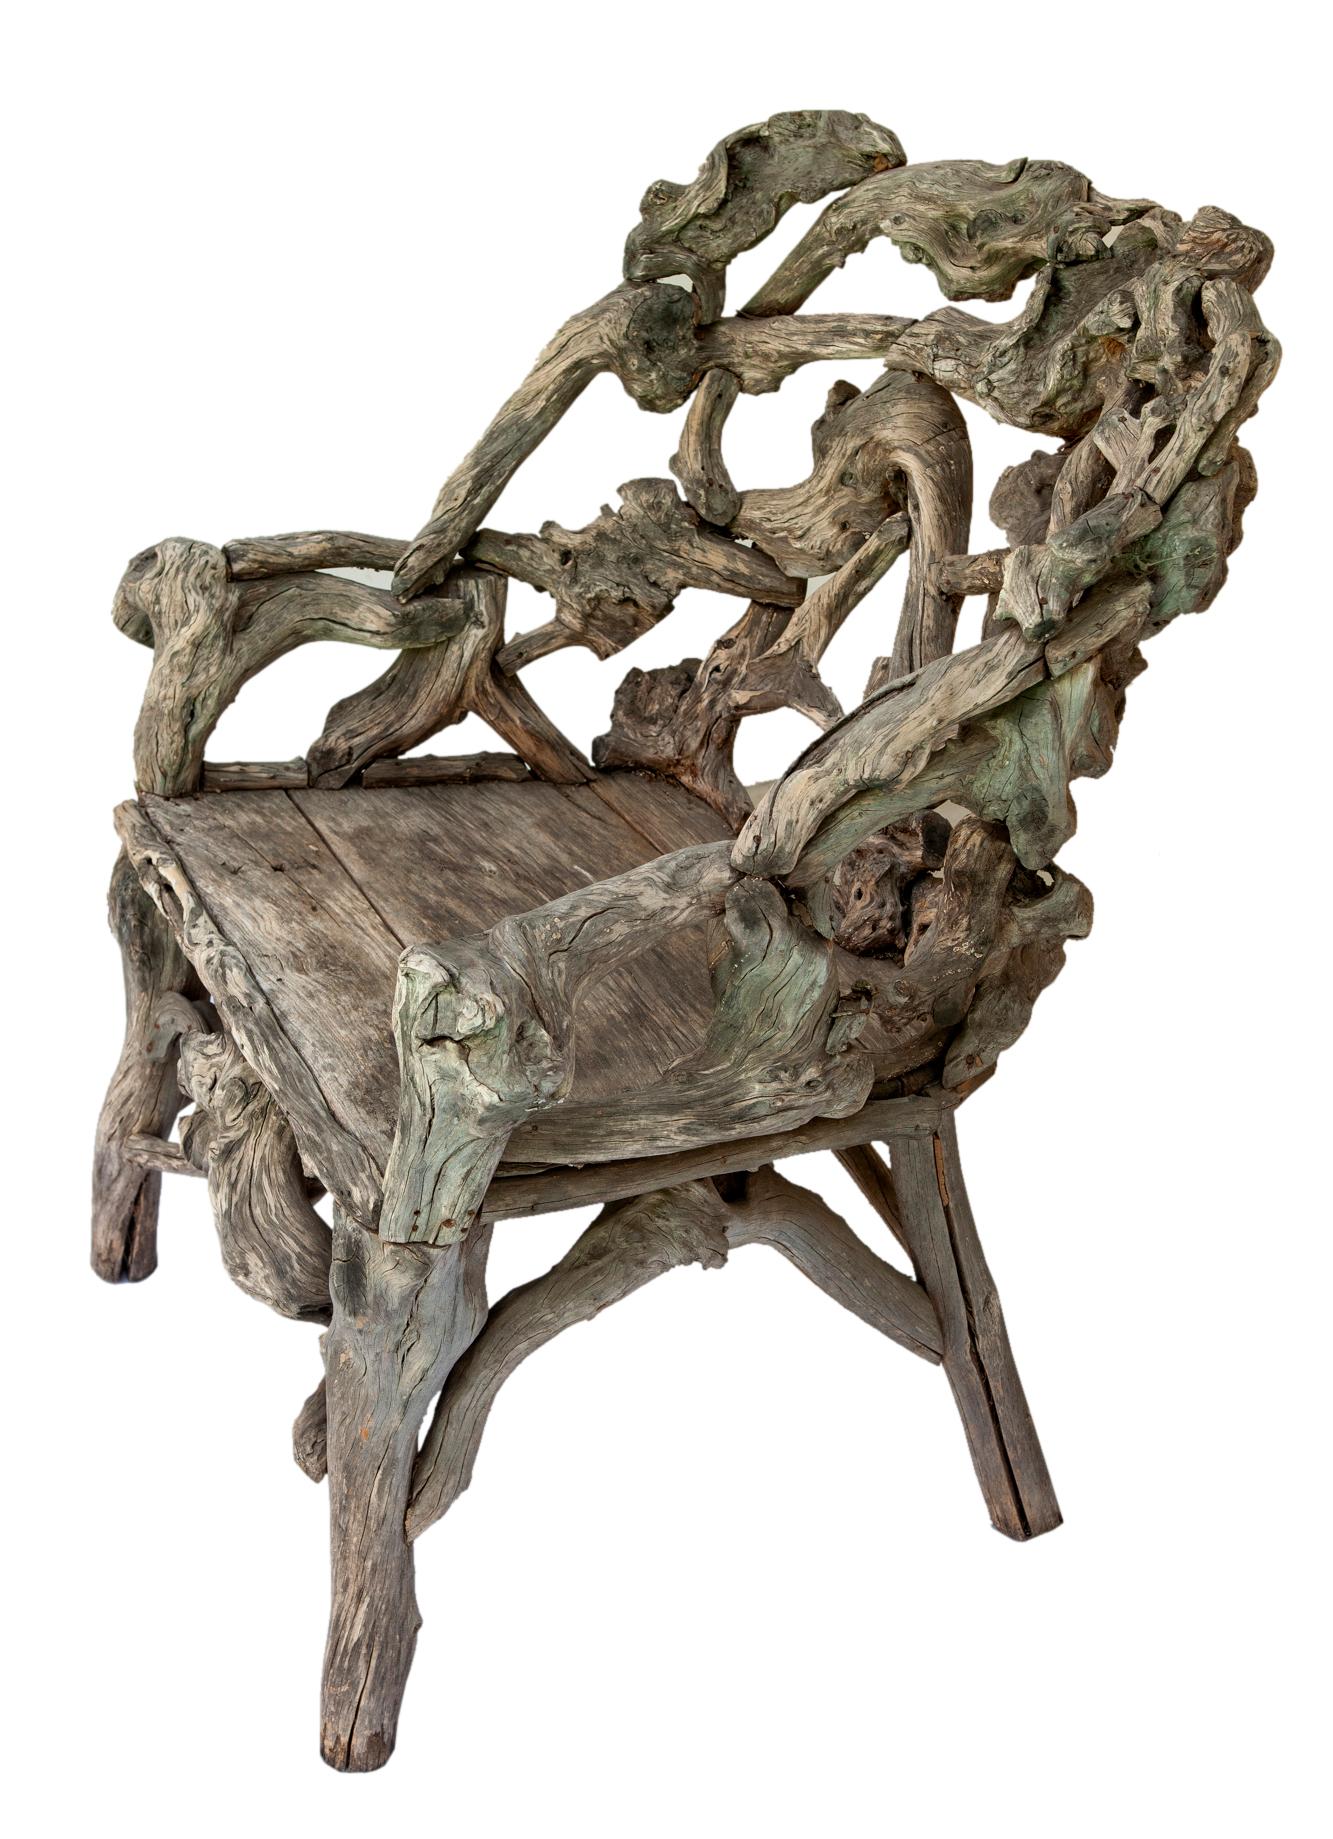 This chair is 1 of 2 available. This 'king chair